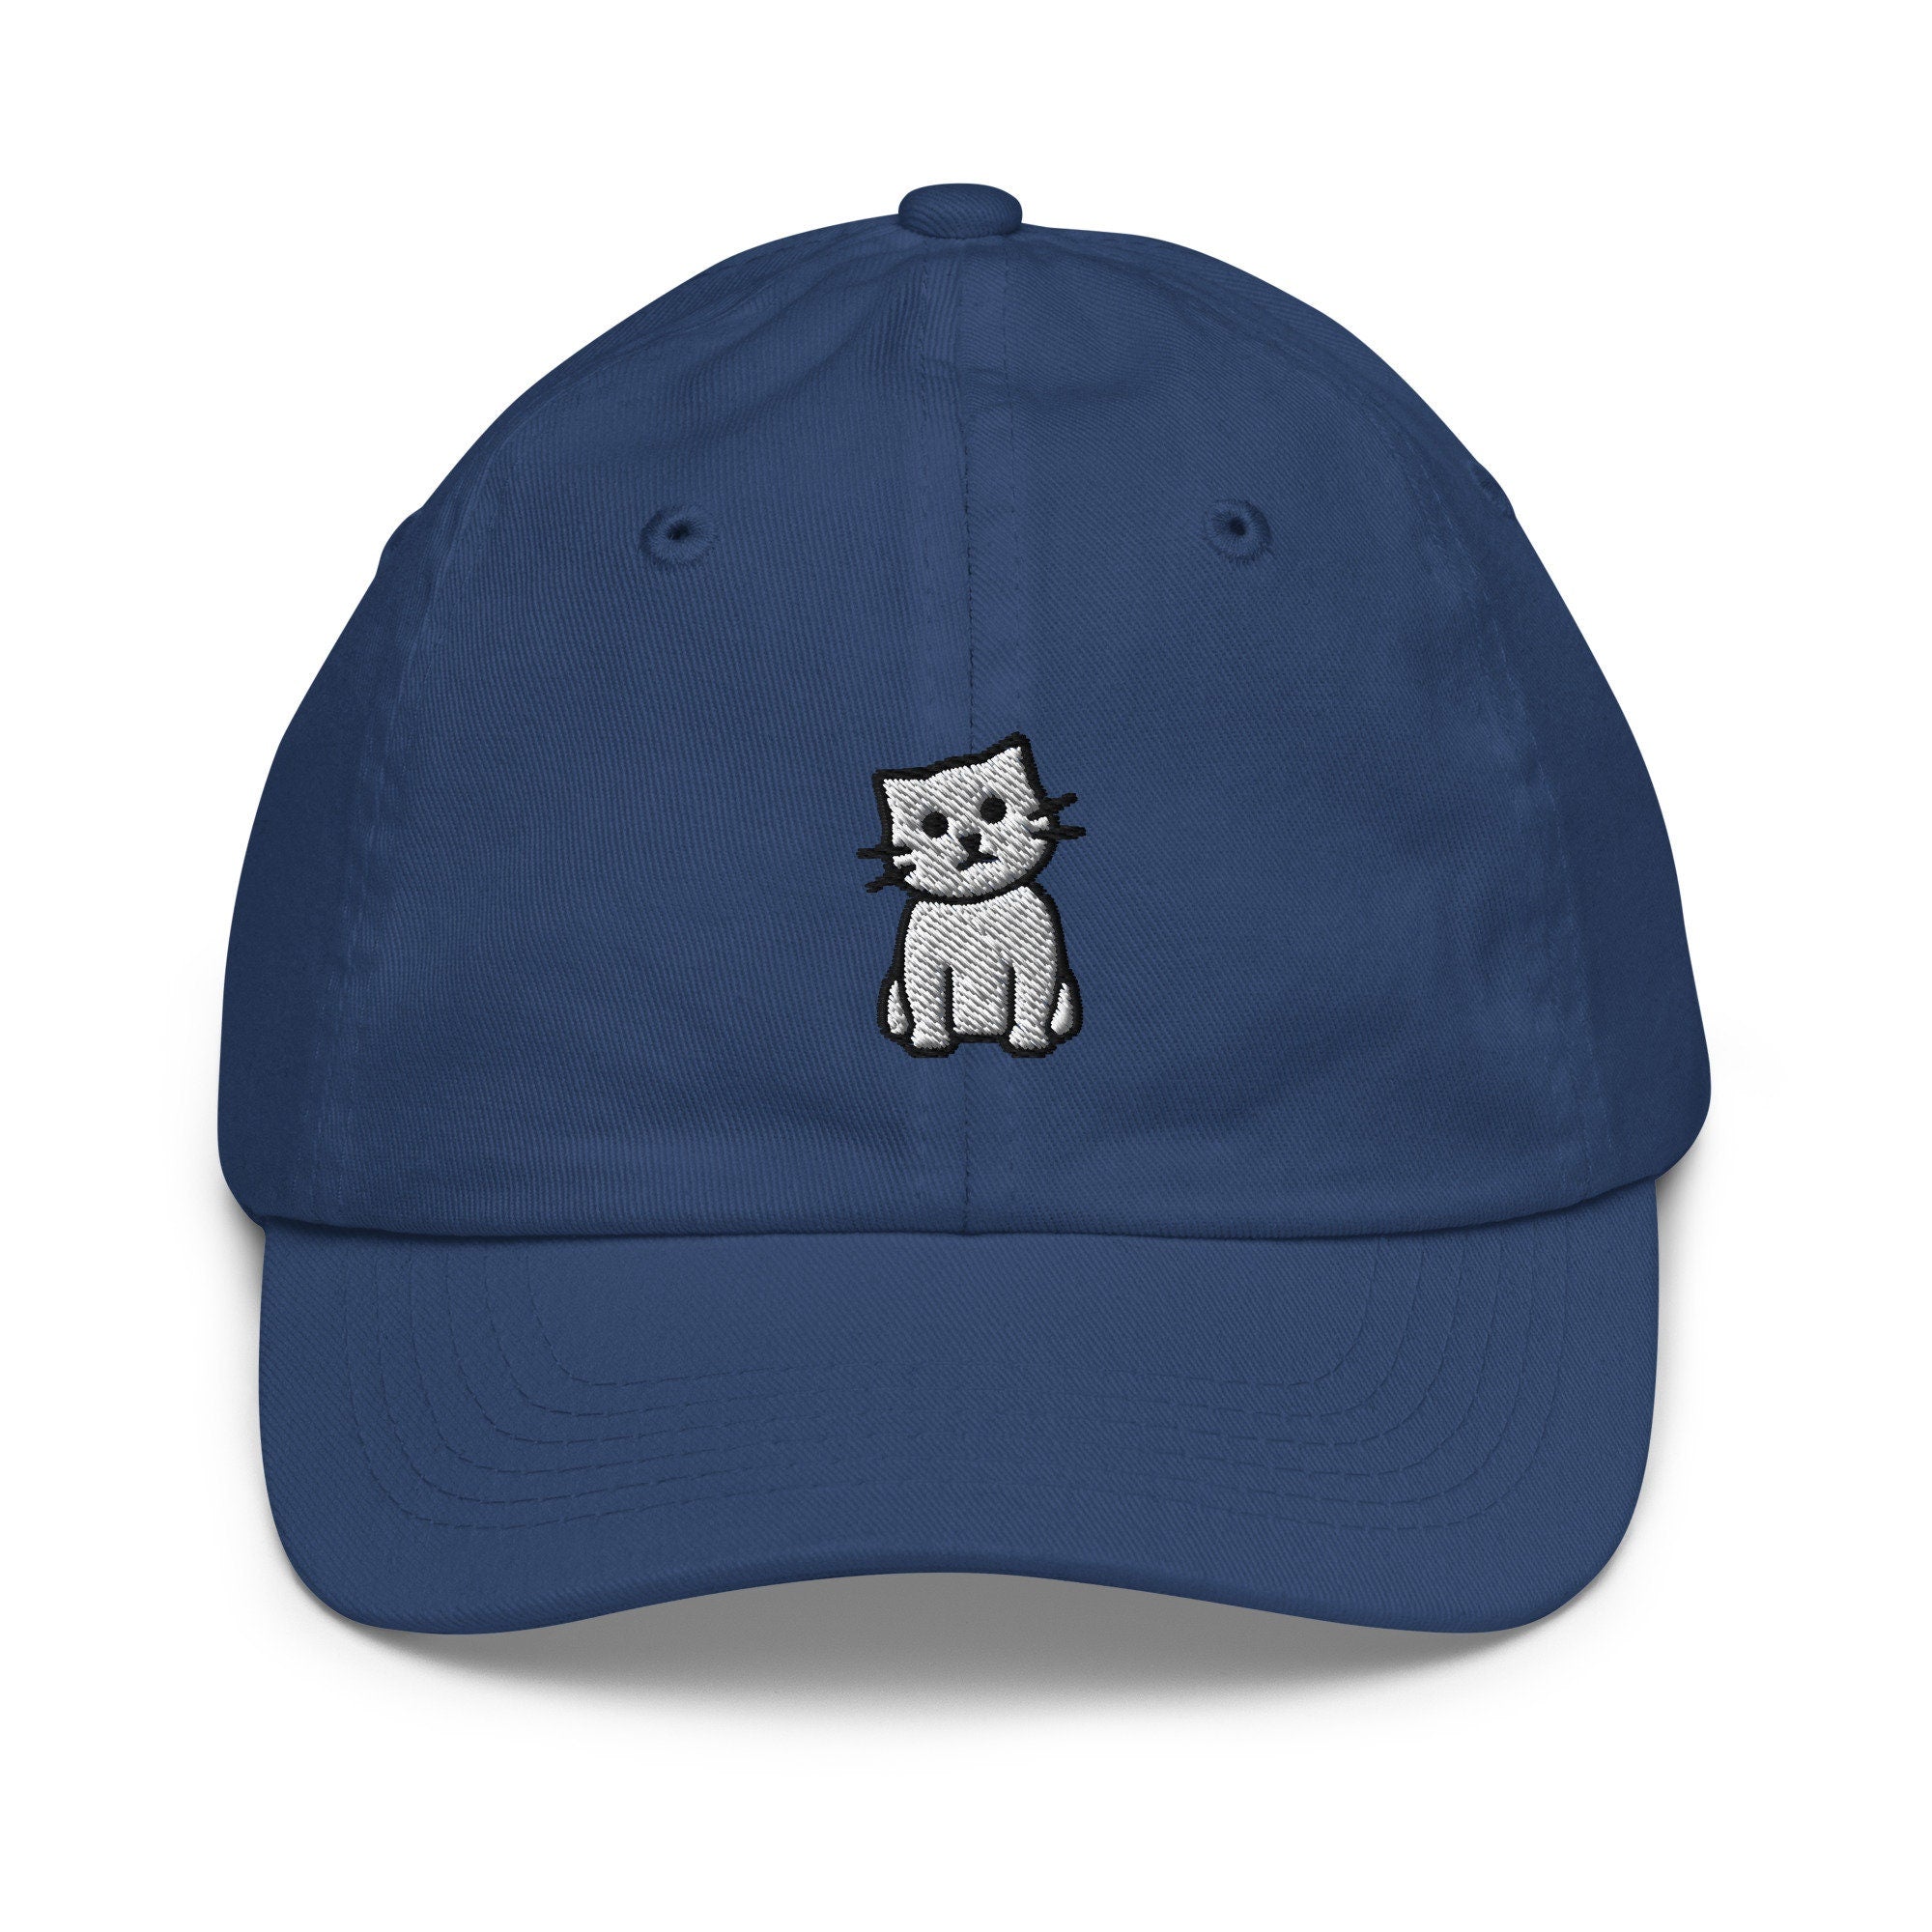 Cat Youth Baseball Cap, Handmade Kids Hat, Embroidered Childrens Hat Gift - Multiple Colors